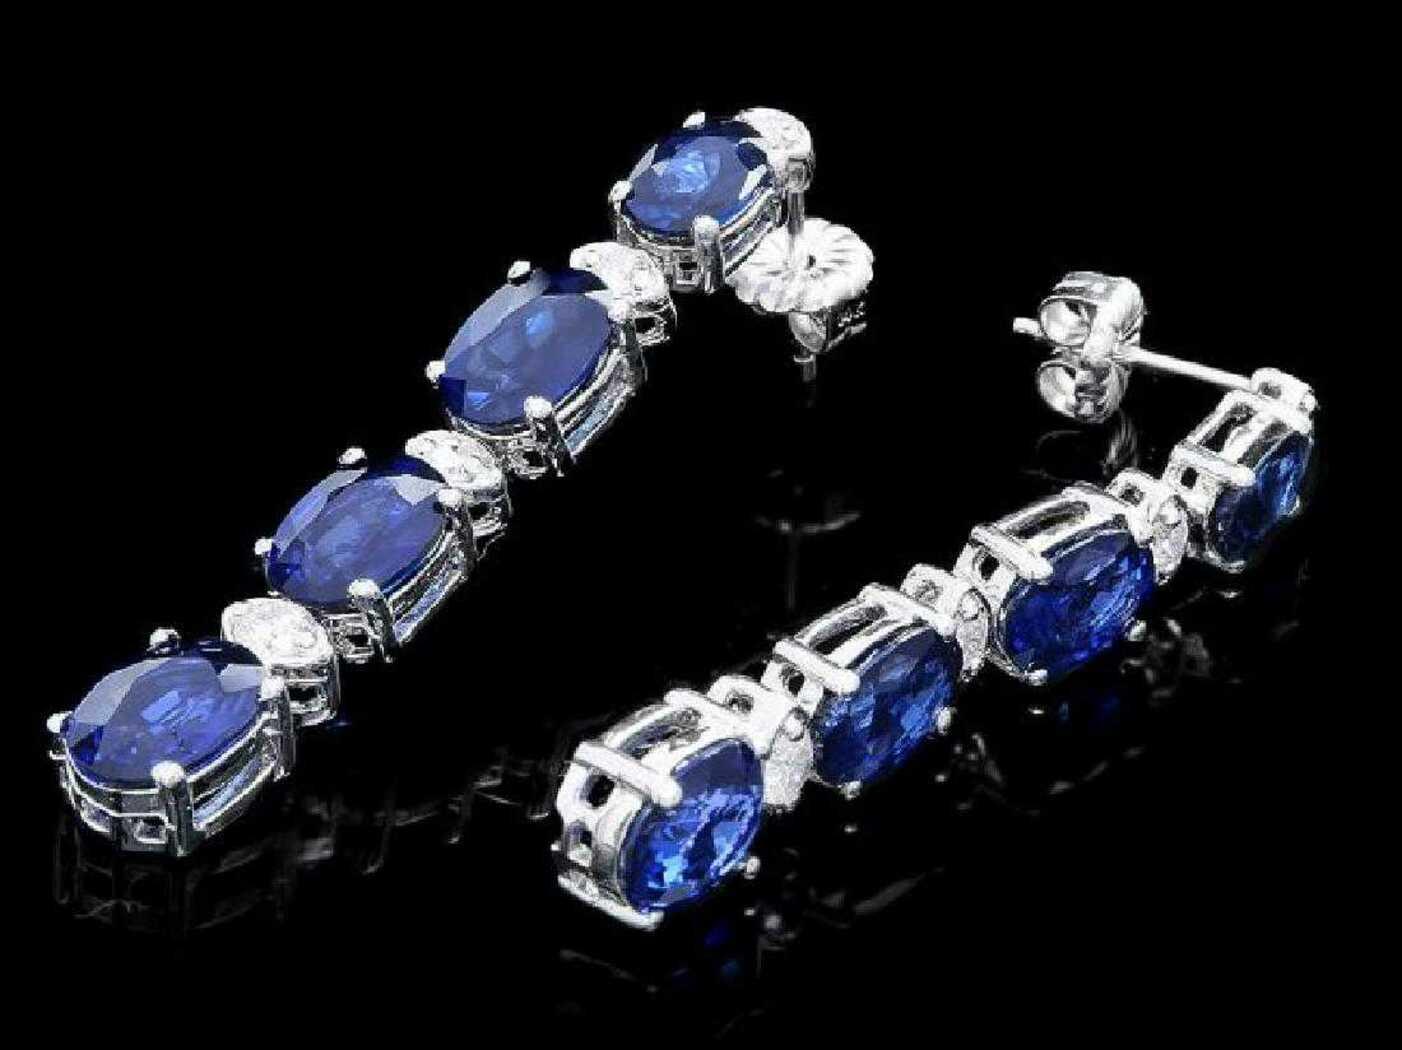 14K White Gold 6.88ct Sapphire and 0.37ct Diamond Earrings